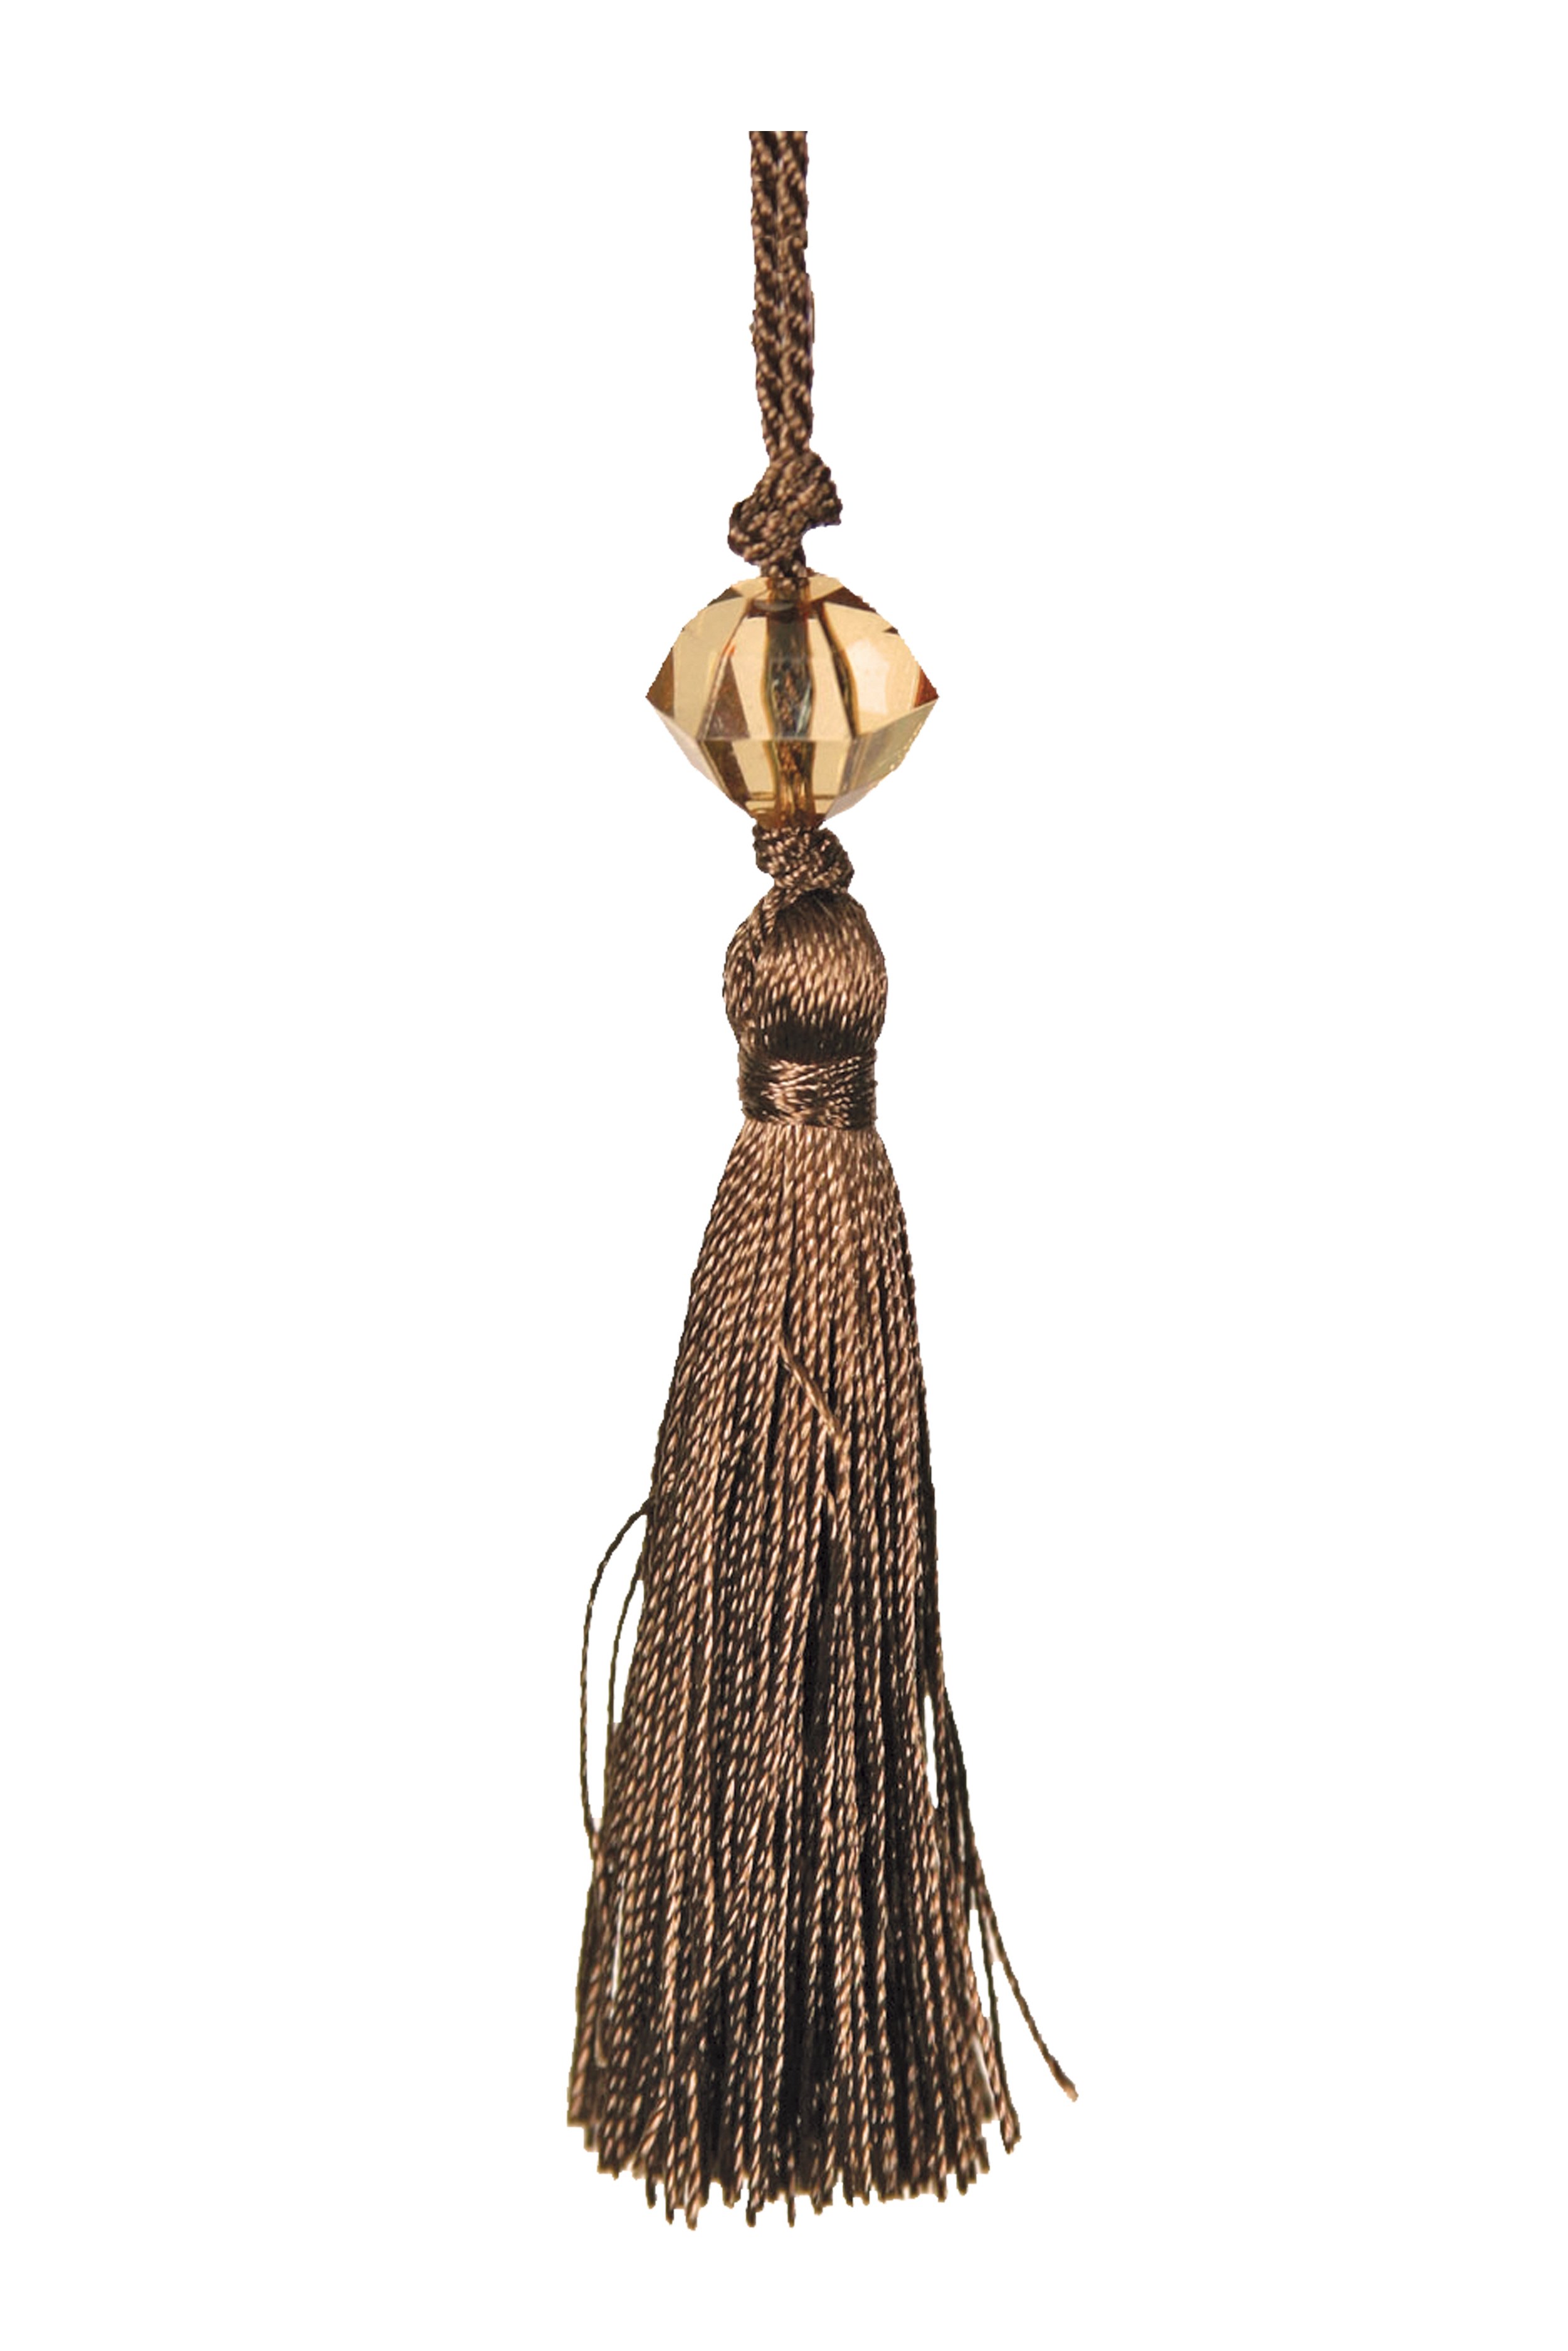 Small Tassel with Bead - Brown 6.5cm Pack of 5